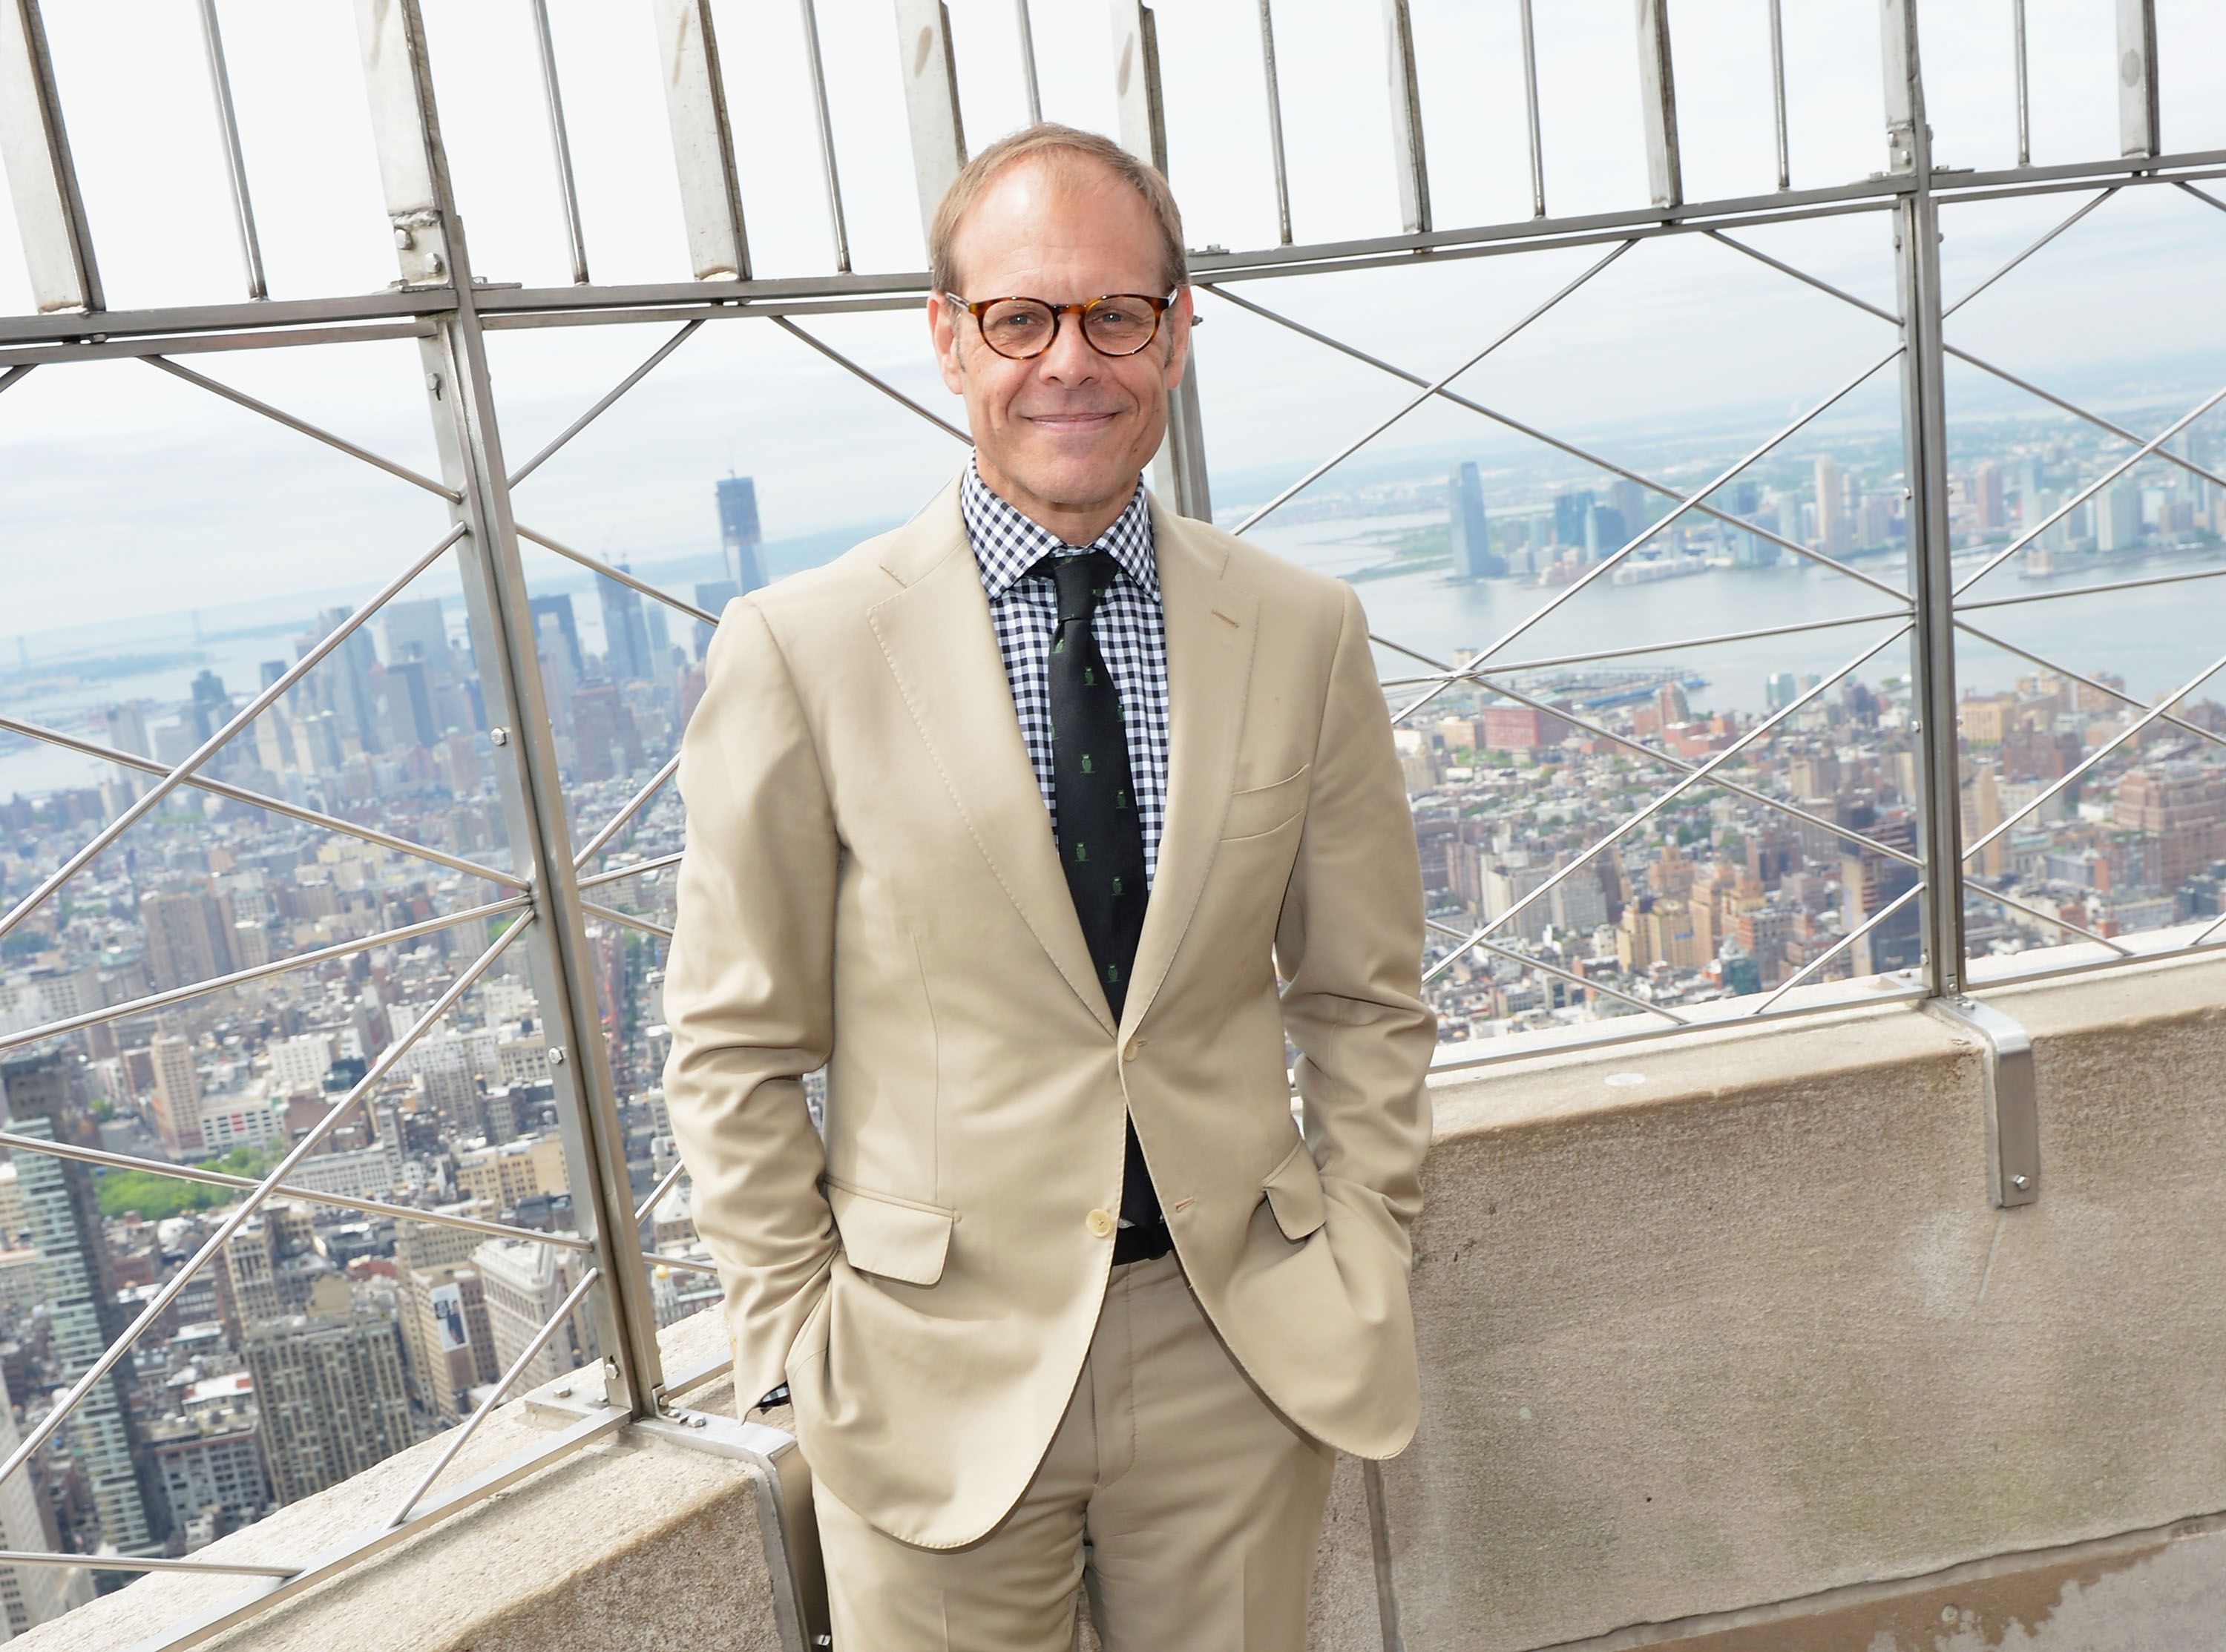 Alton Brown at Empire State Building Lighting In Celebration Of the 2012 James Beard Foundation at The Empire State Building on May 7, 2012 | Photo: Getty Images